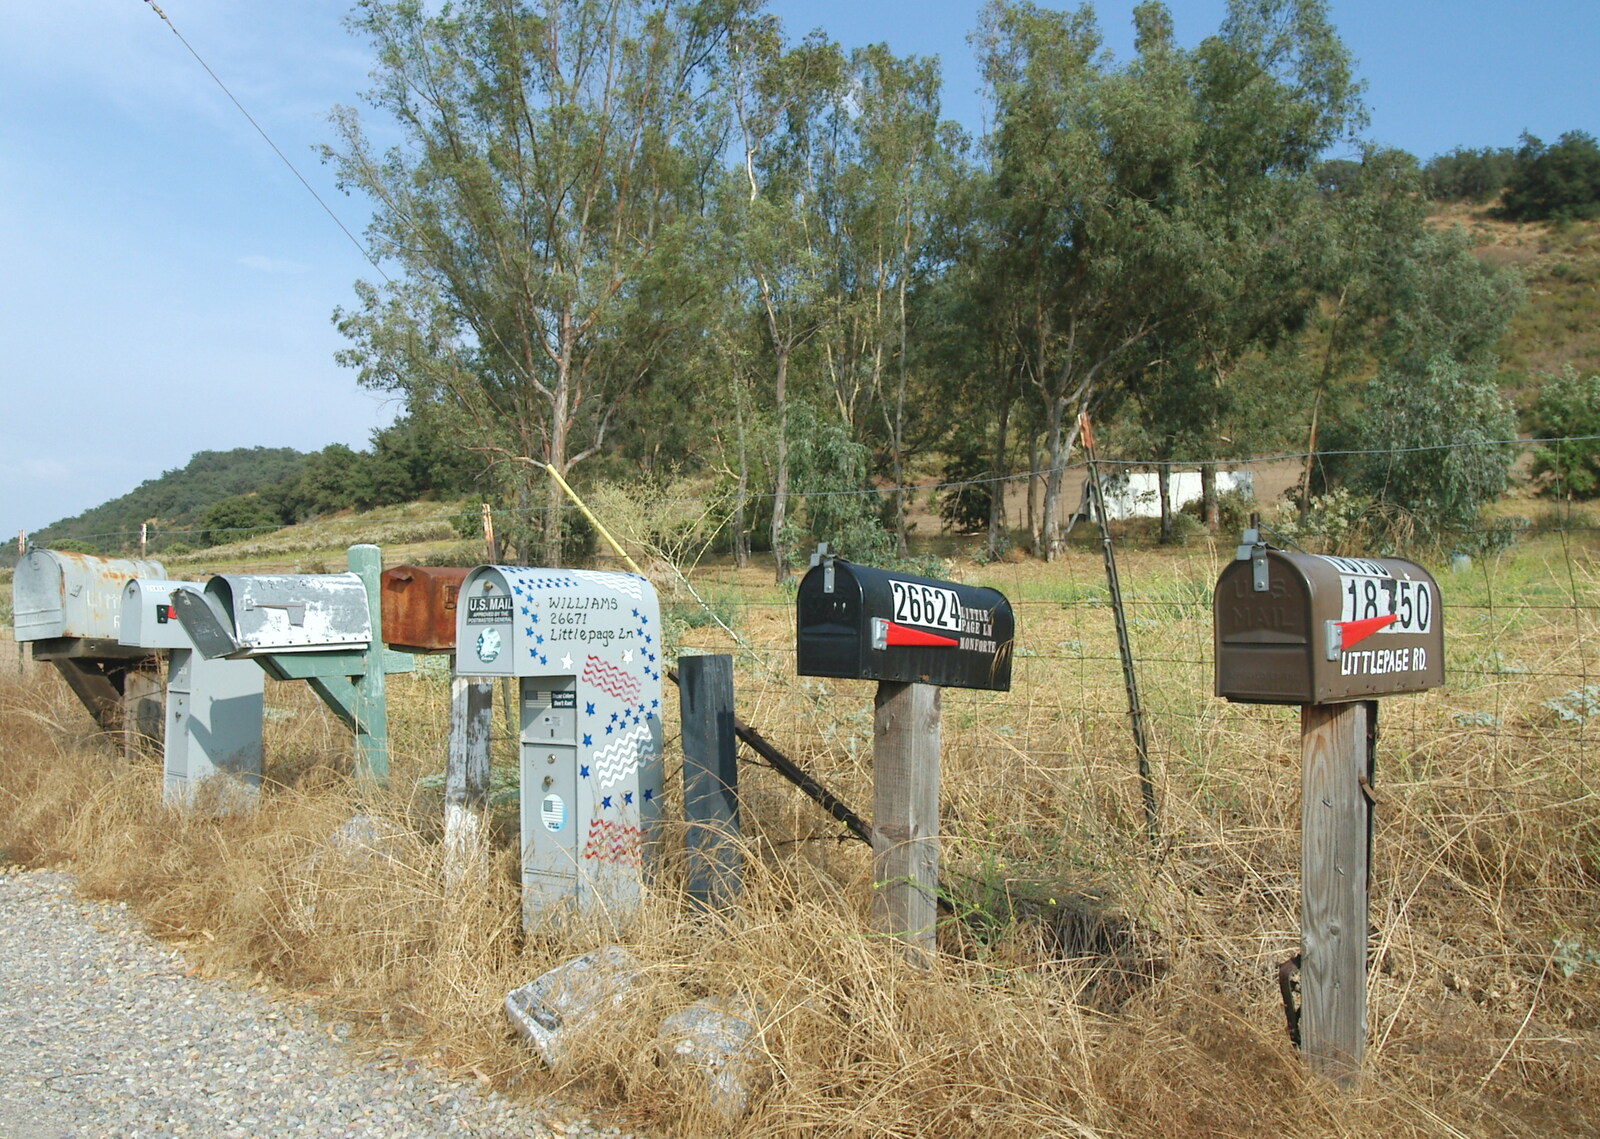 Postboxes on sticks, on Littlepage Lane from Route 78: A Drive Around the San Diego Mountains, California, US - 9th August 2005